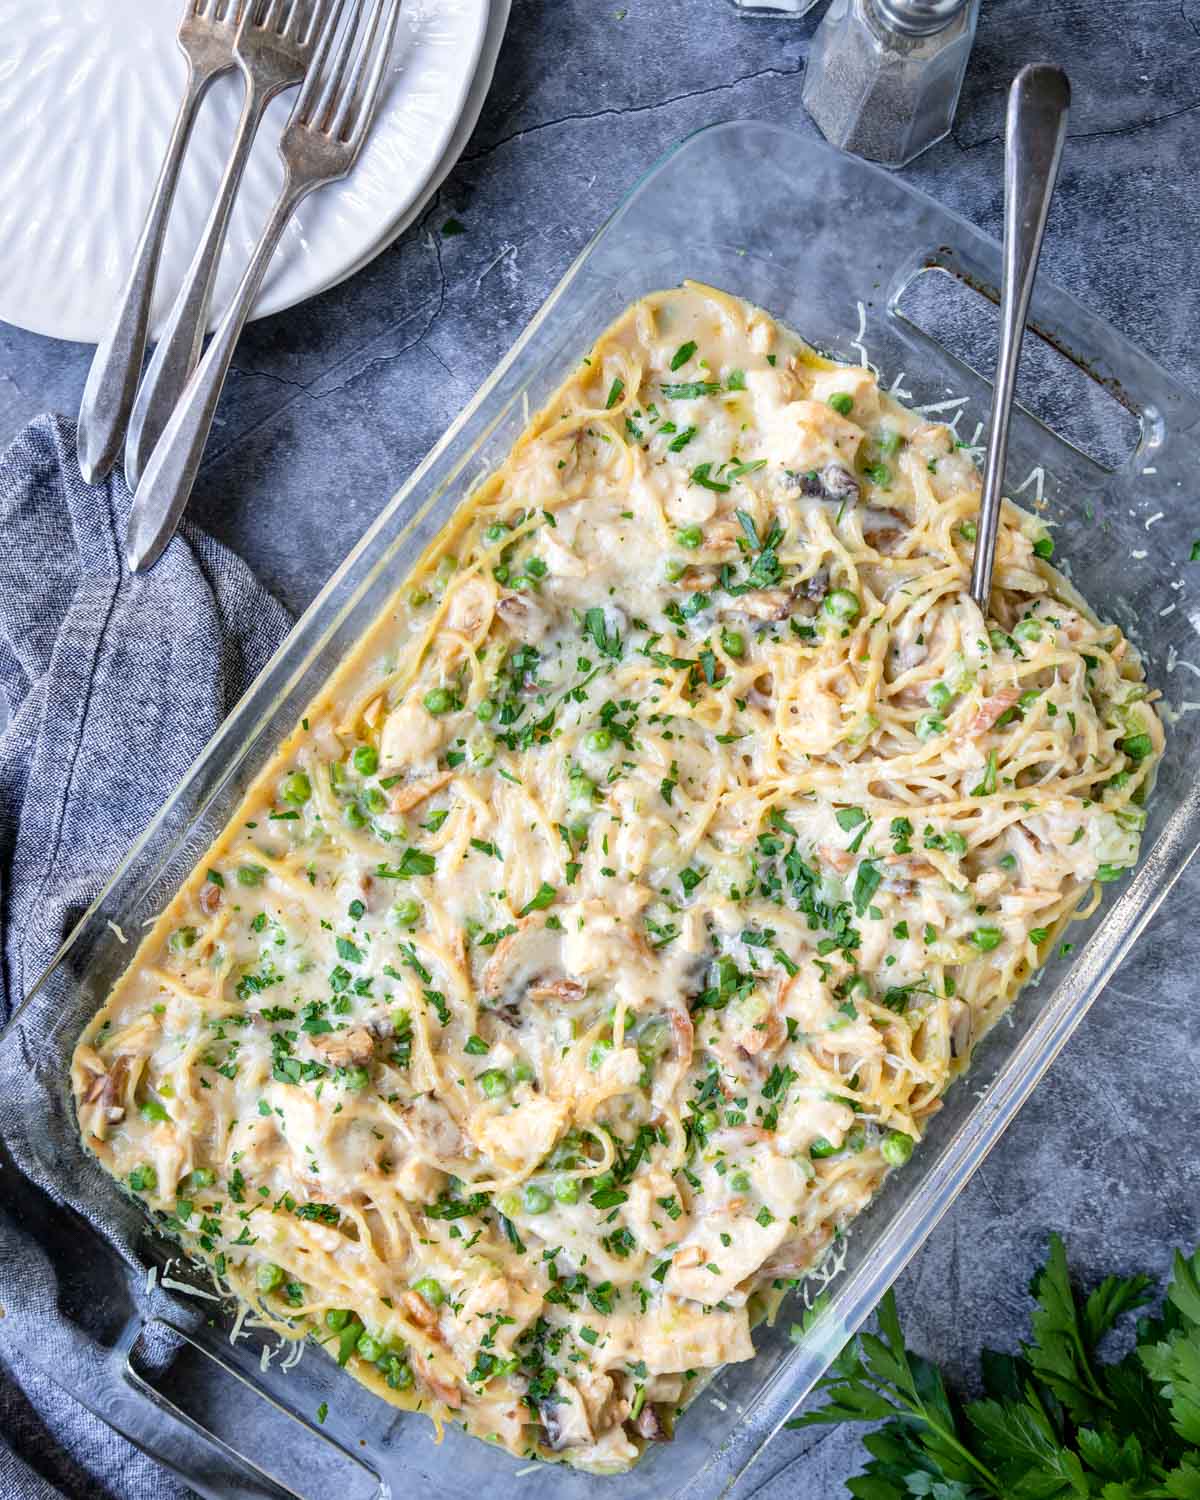 chicken tetrazzini on a table with plates and forks